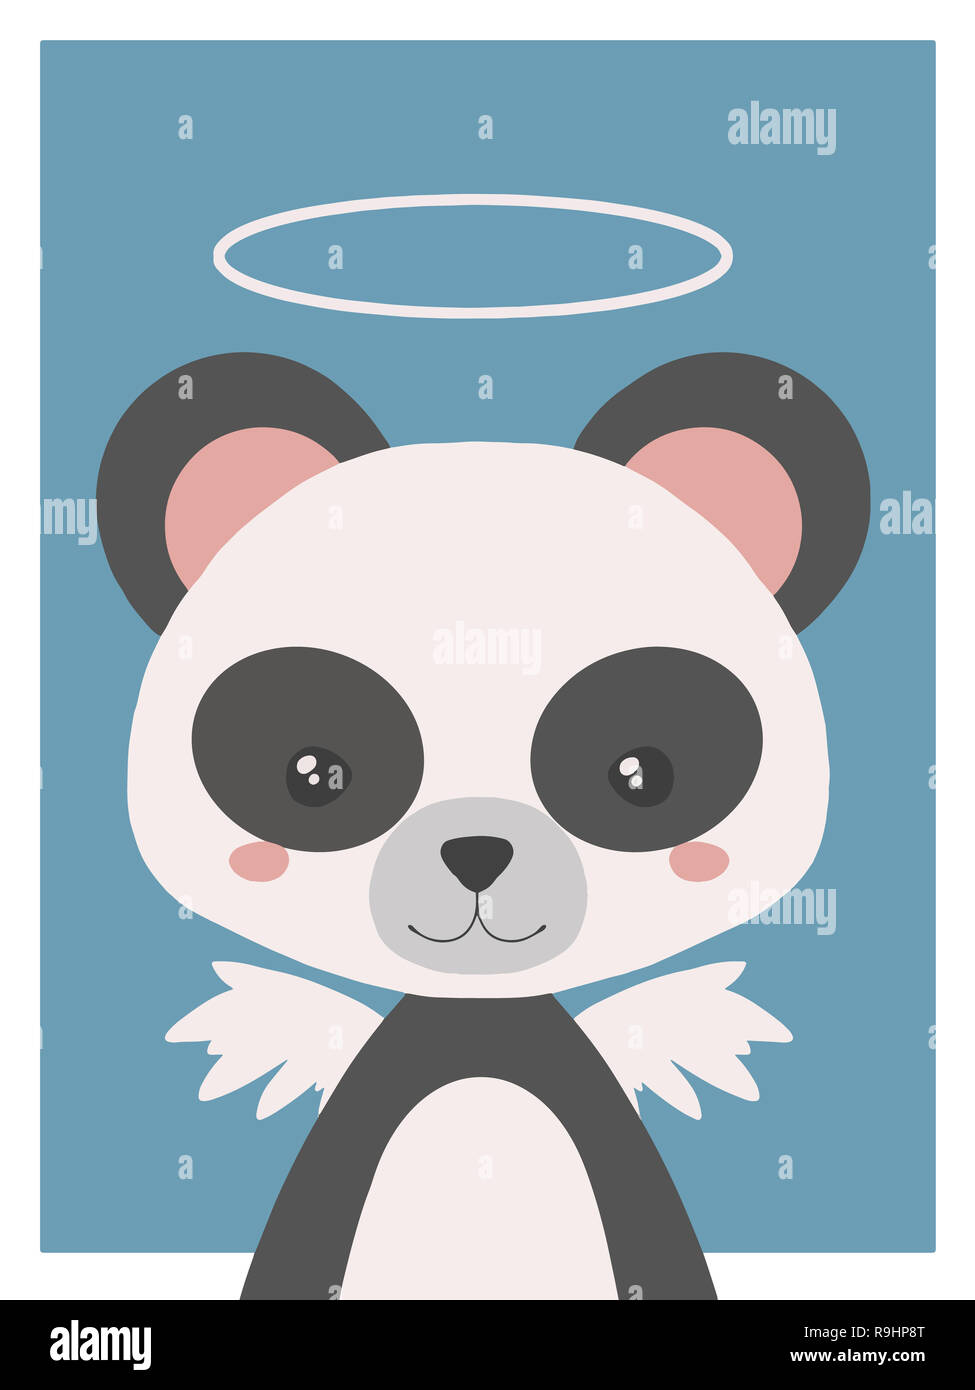 Cute cartoons style nursery animal drawing of a guardian angel giant panda with halo and wings Stock Photo